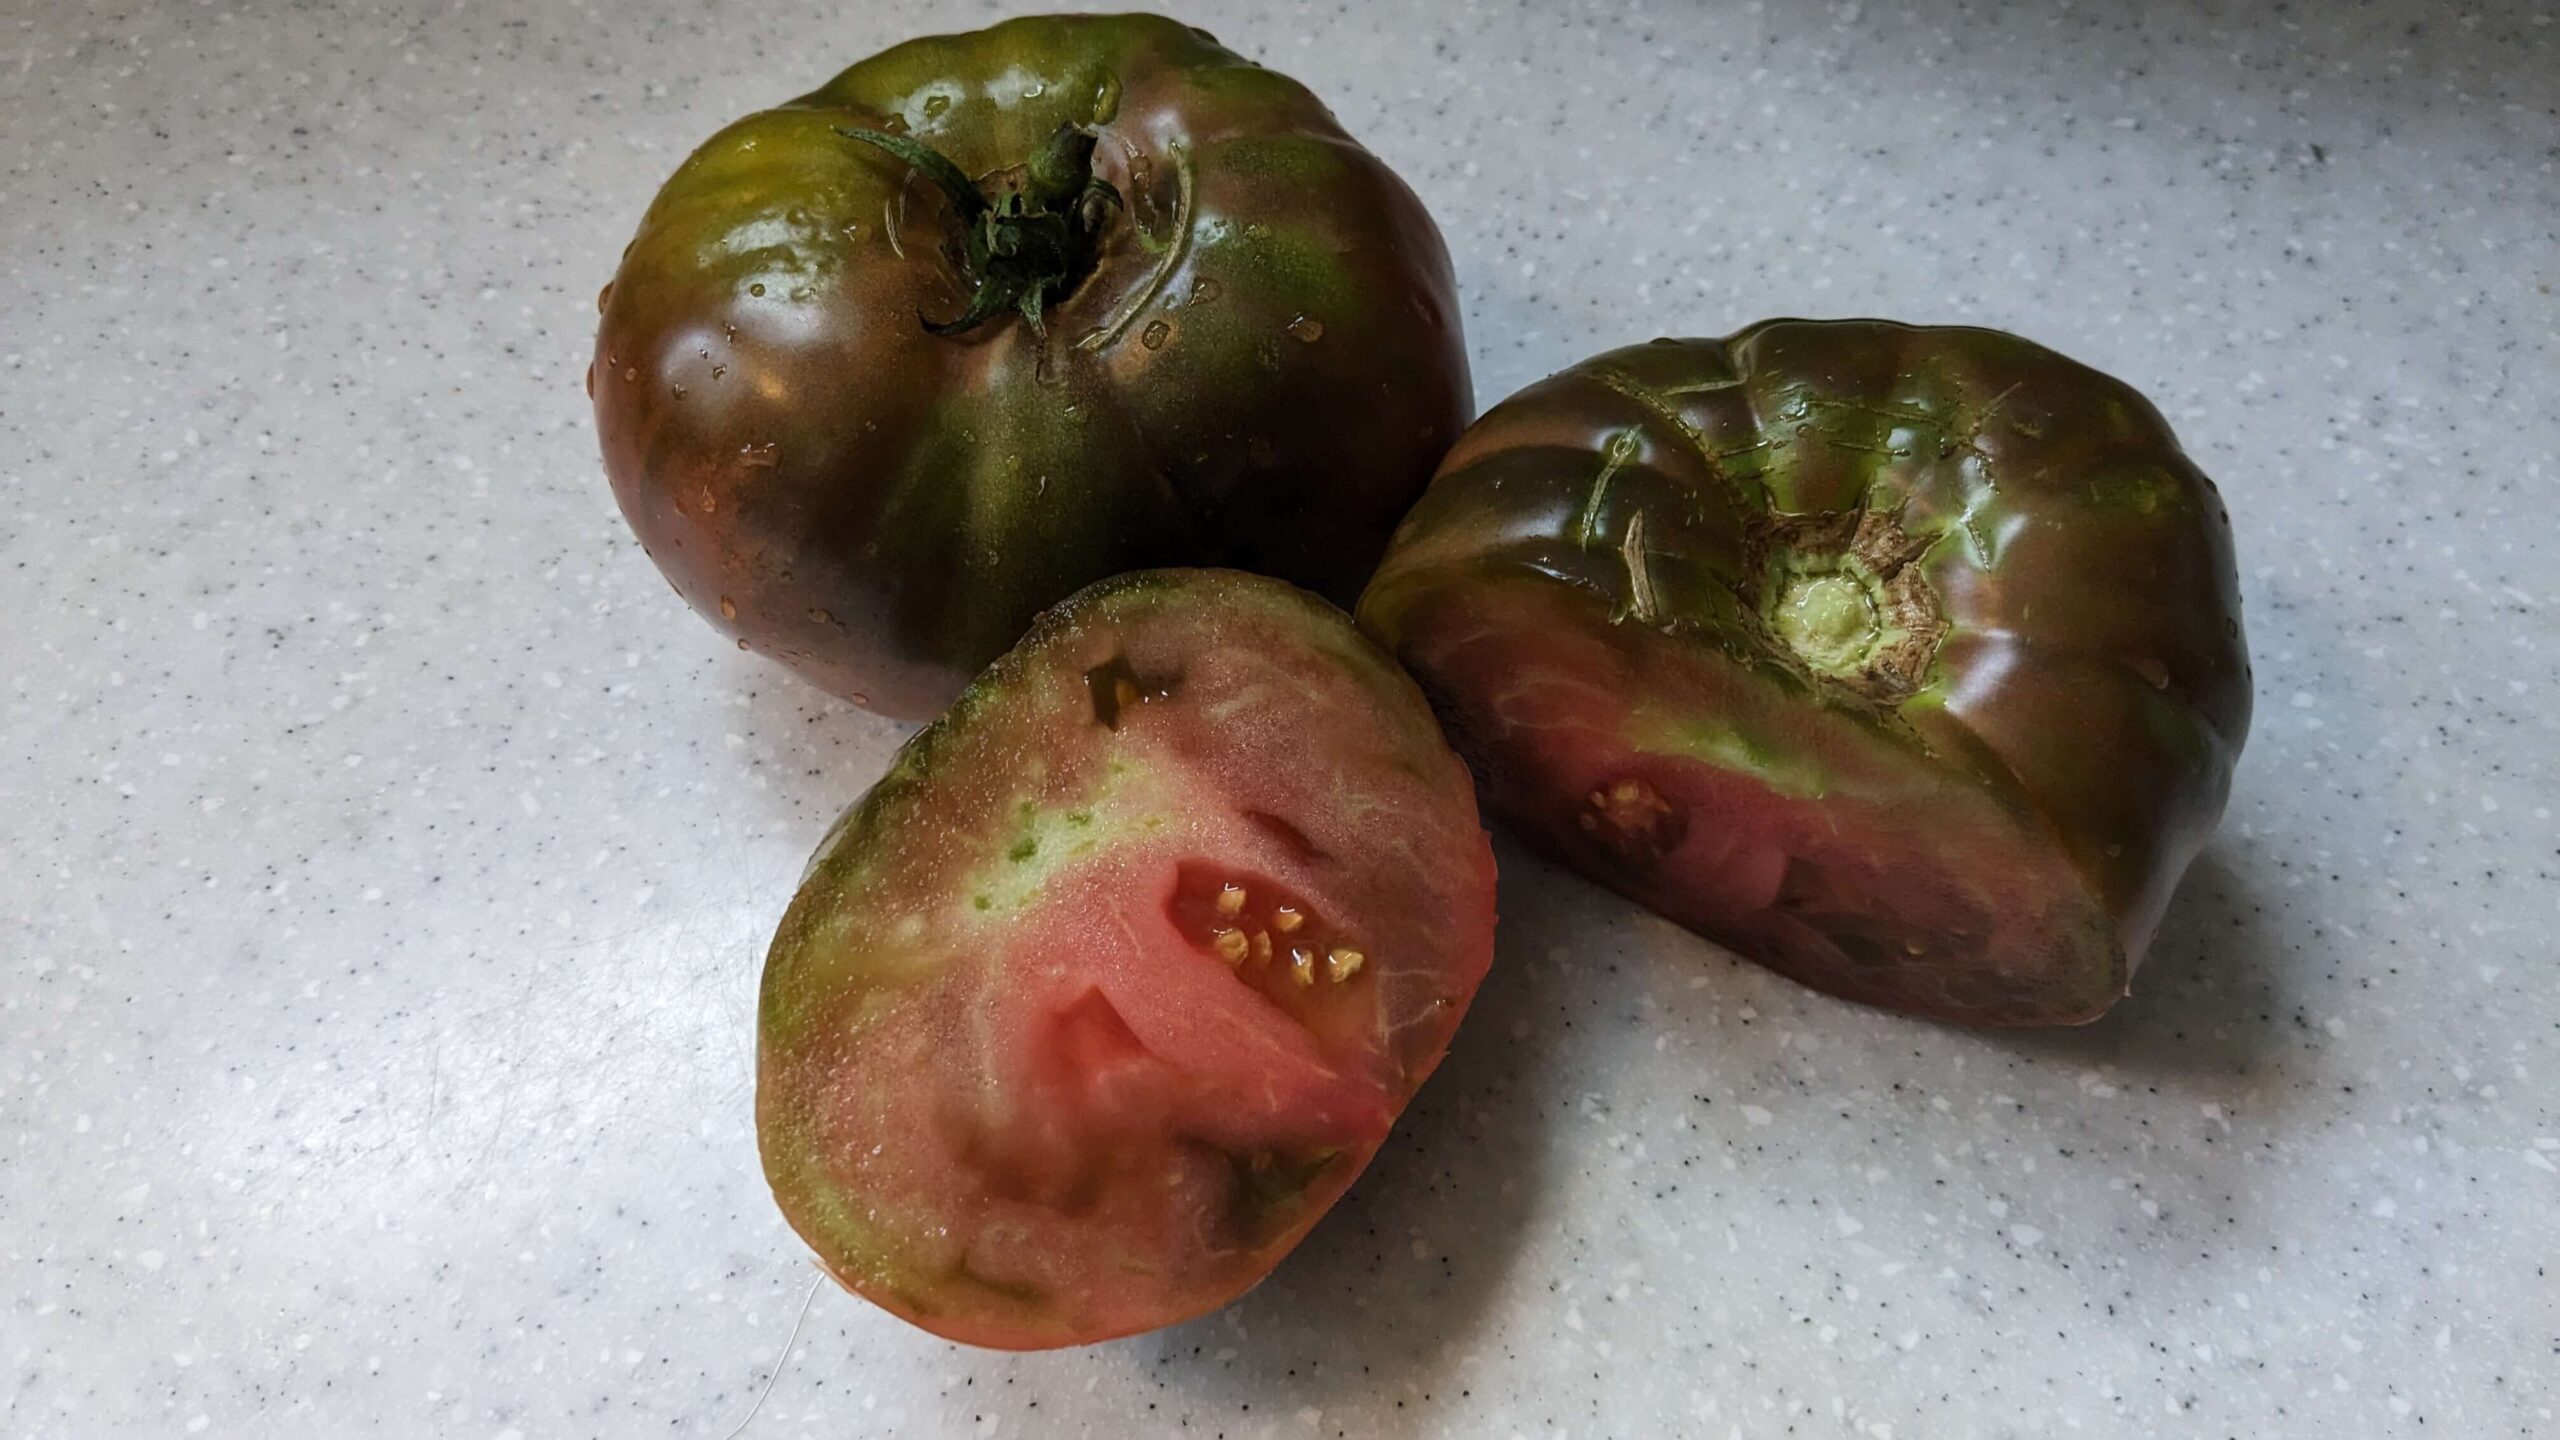 Two black beauty tomatoes, one sliced in half to show the pink a dark red insides